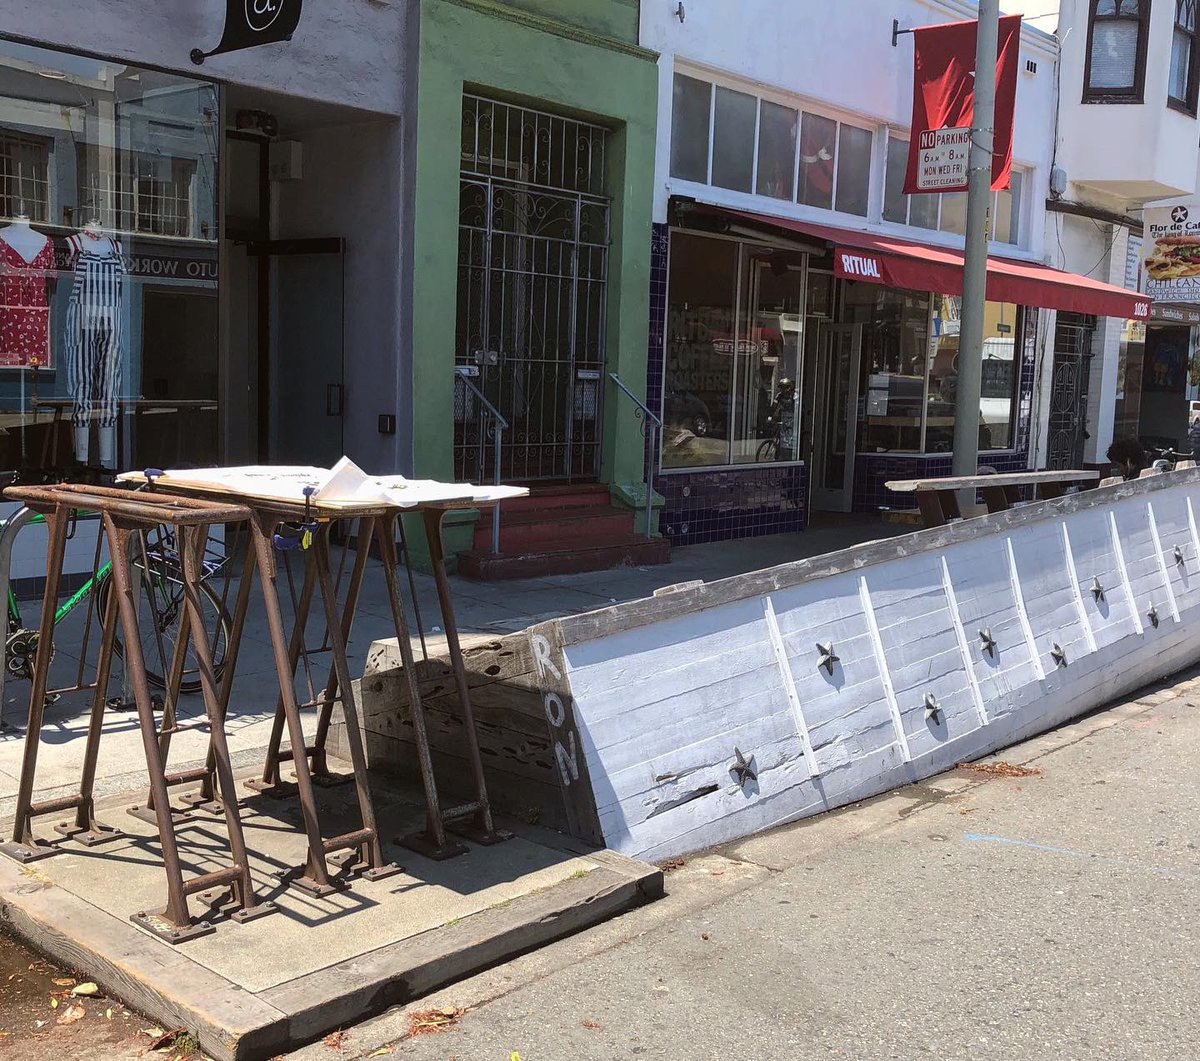 Genius boat (!!) & bike storage combo outside @ritualcoffee on Valencia. Designed by Boor Bridges with landscaping by Ground Cover Landscaping.  #parklet #valenciastreet #sanfrancisco #knownspace #nauticalvibes